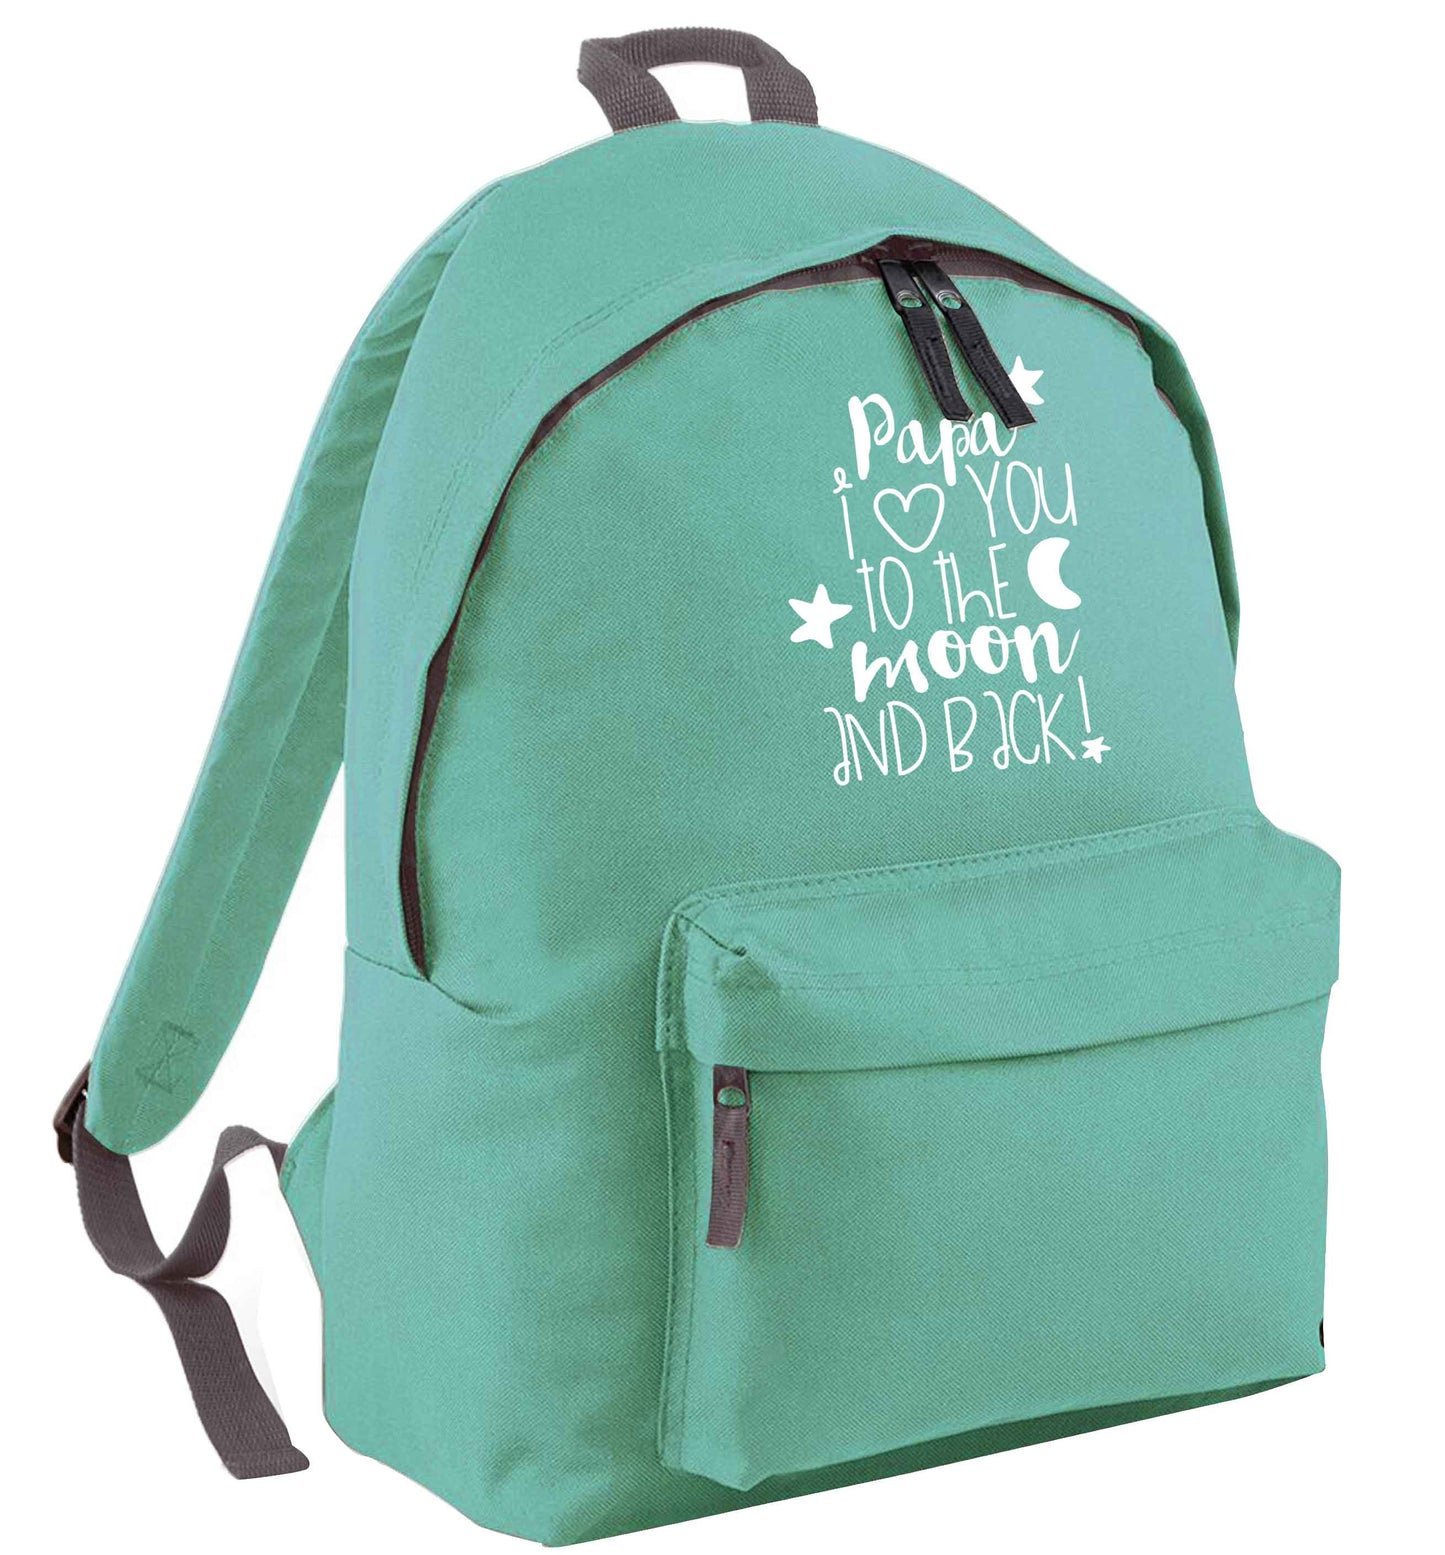 Papa I love you to the moon and back mint adults backpack